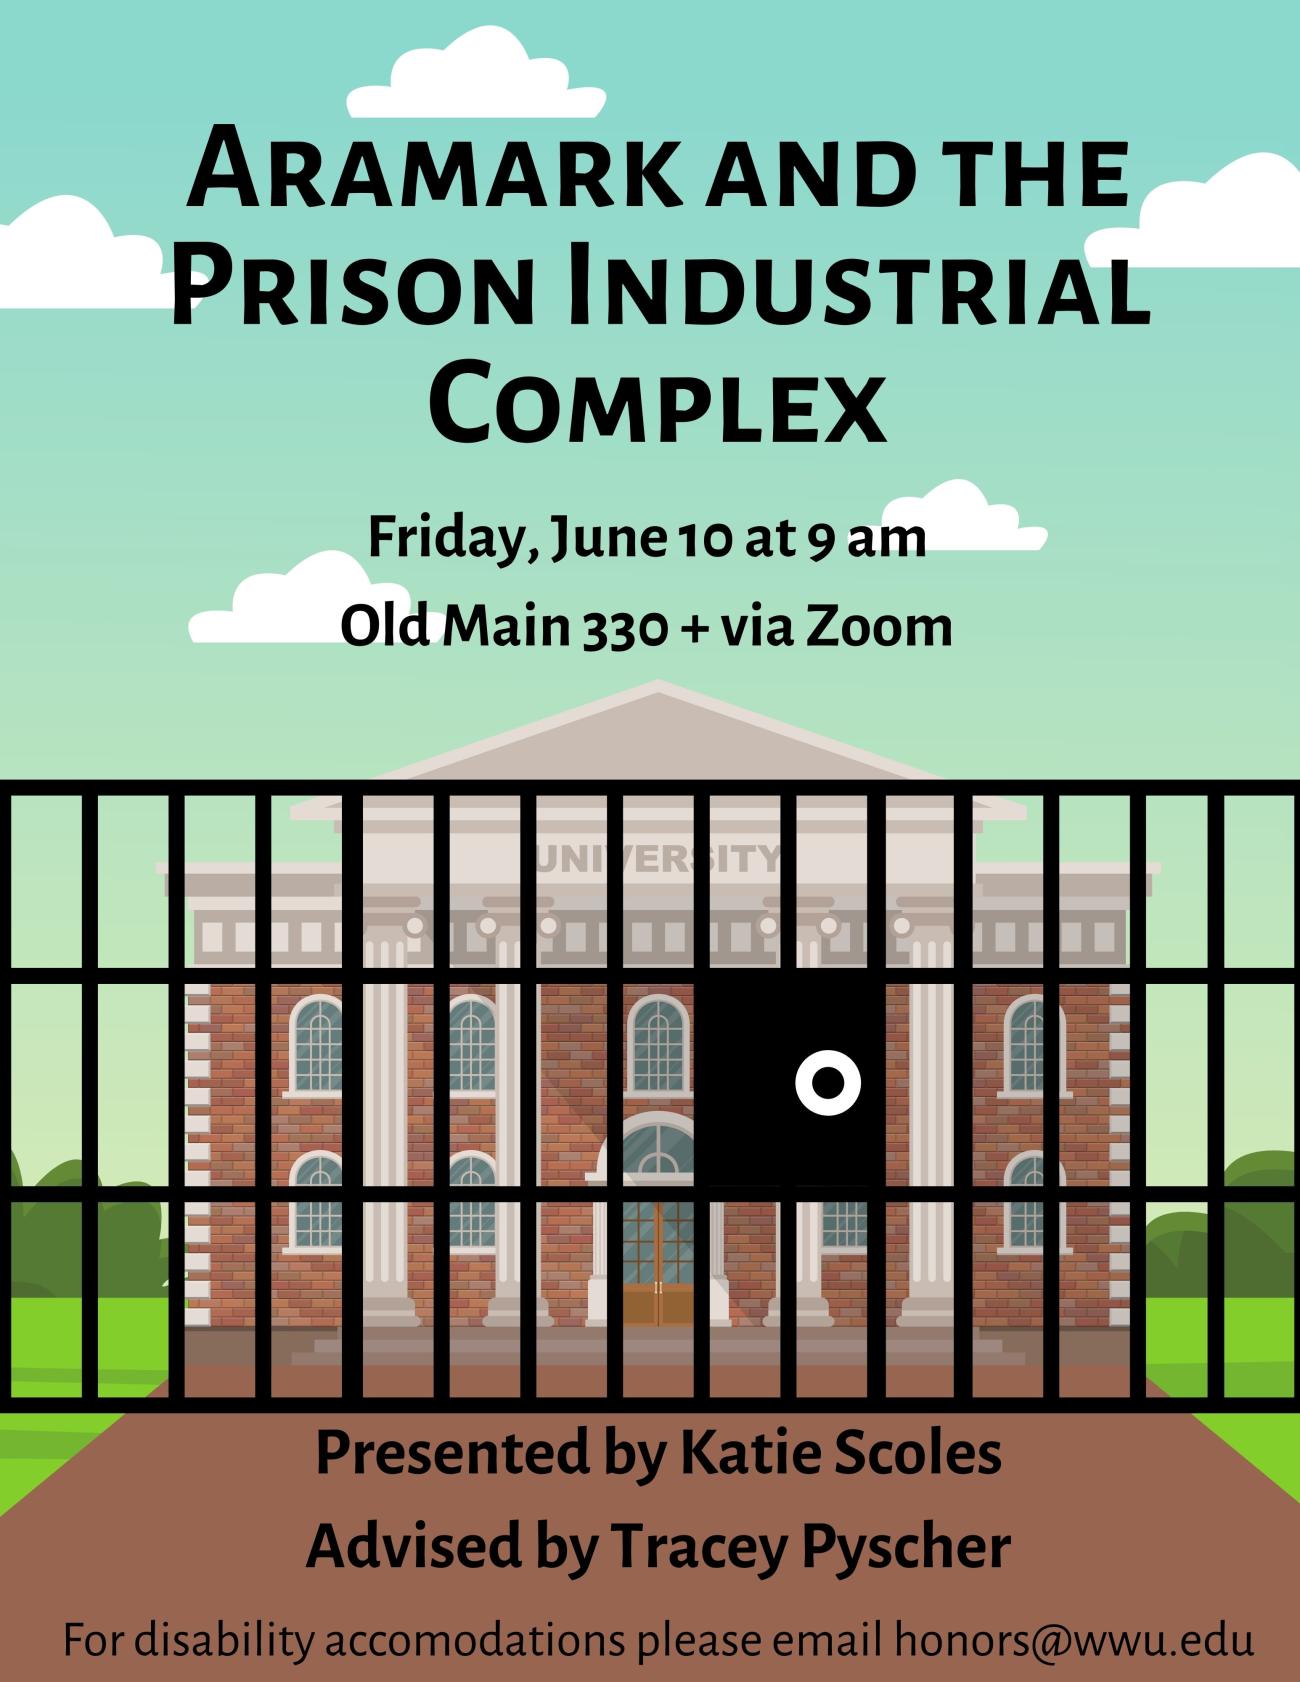 A poster wth clip art of a brick university building sitting on a grass lawn with a blue sky background. In front of it are jail bars blocking the path to the building. Text reads “Aramark and the Prison Industrial Complex. June 10 at 9 am. Presented by Katie Scoles, Advised by Tracey Pyscher. For disability accommodations please email honors@wwu.edu.”